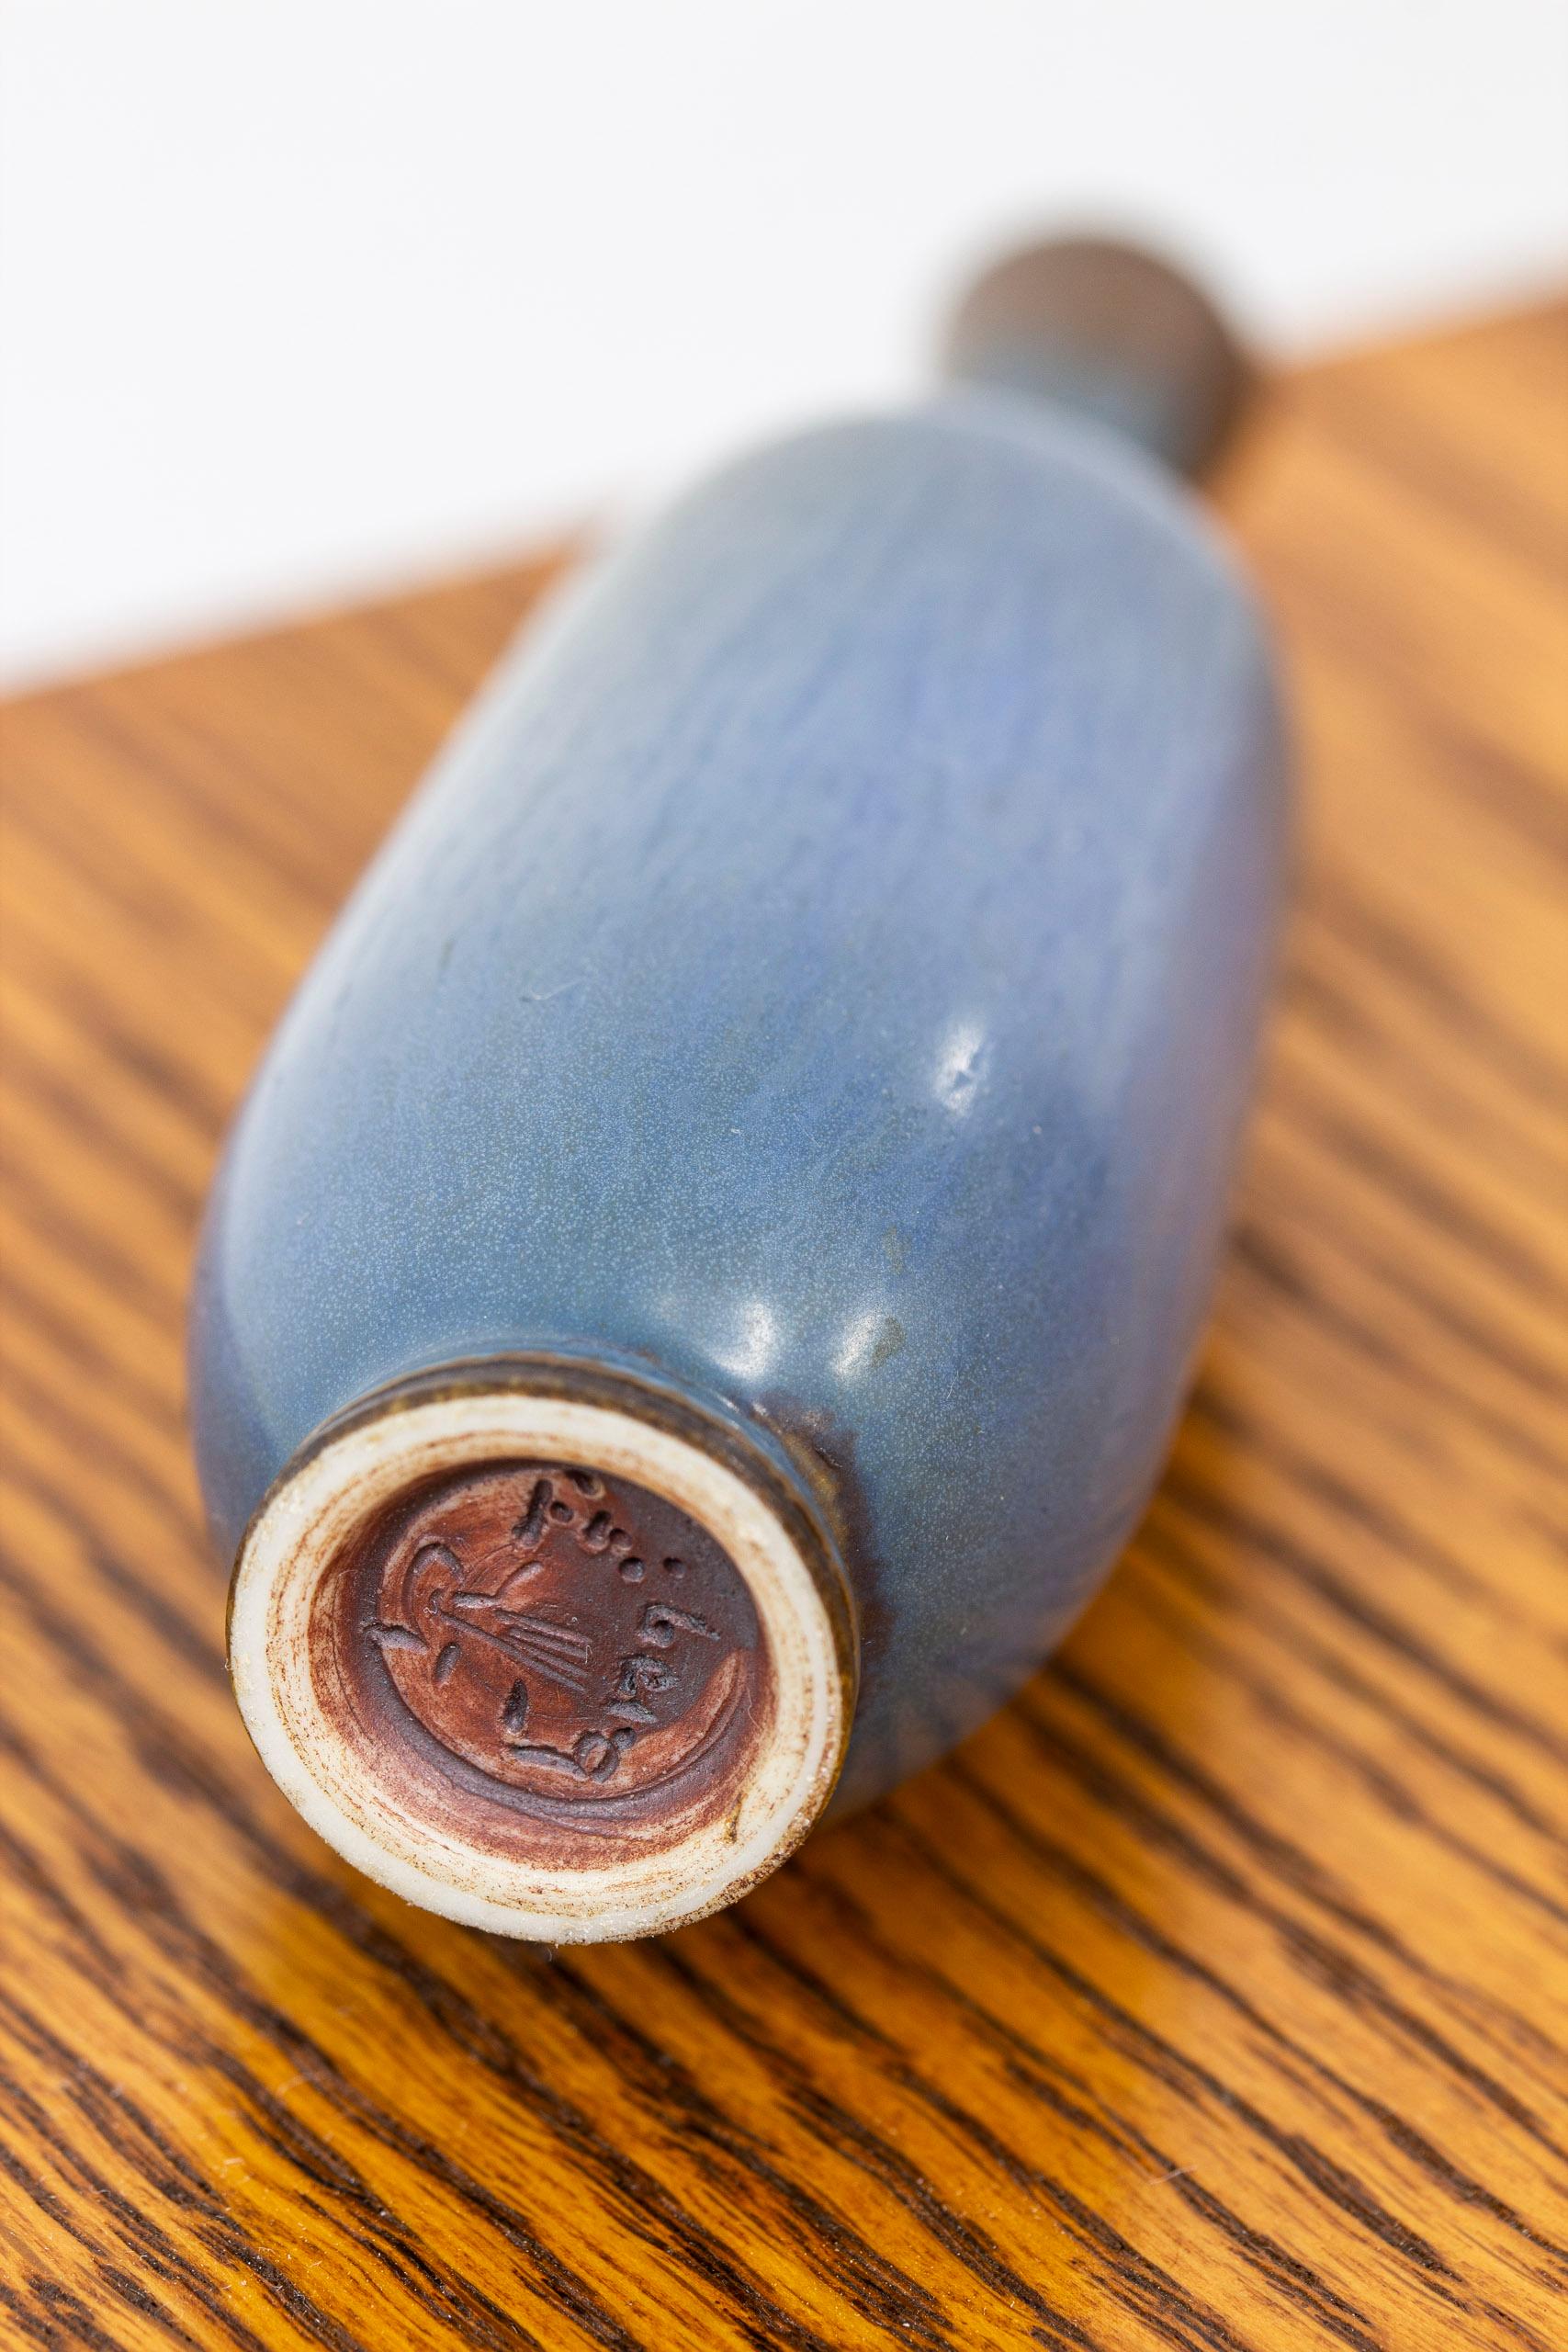 Stoneware vase designed by Berndt Friberg. Hand made at Gustavsbergs Studio, ca 1950s. Hand turned with glaze shifting in various blue, grey and brown tones. Very good condition without damages or defects. Signed as pictured.